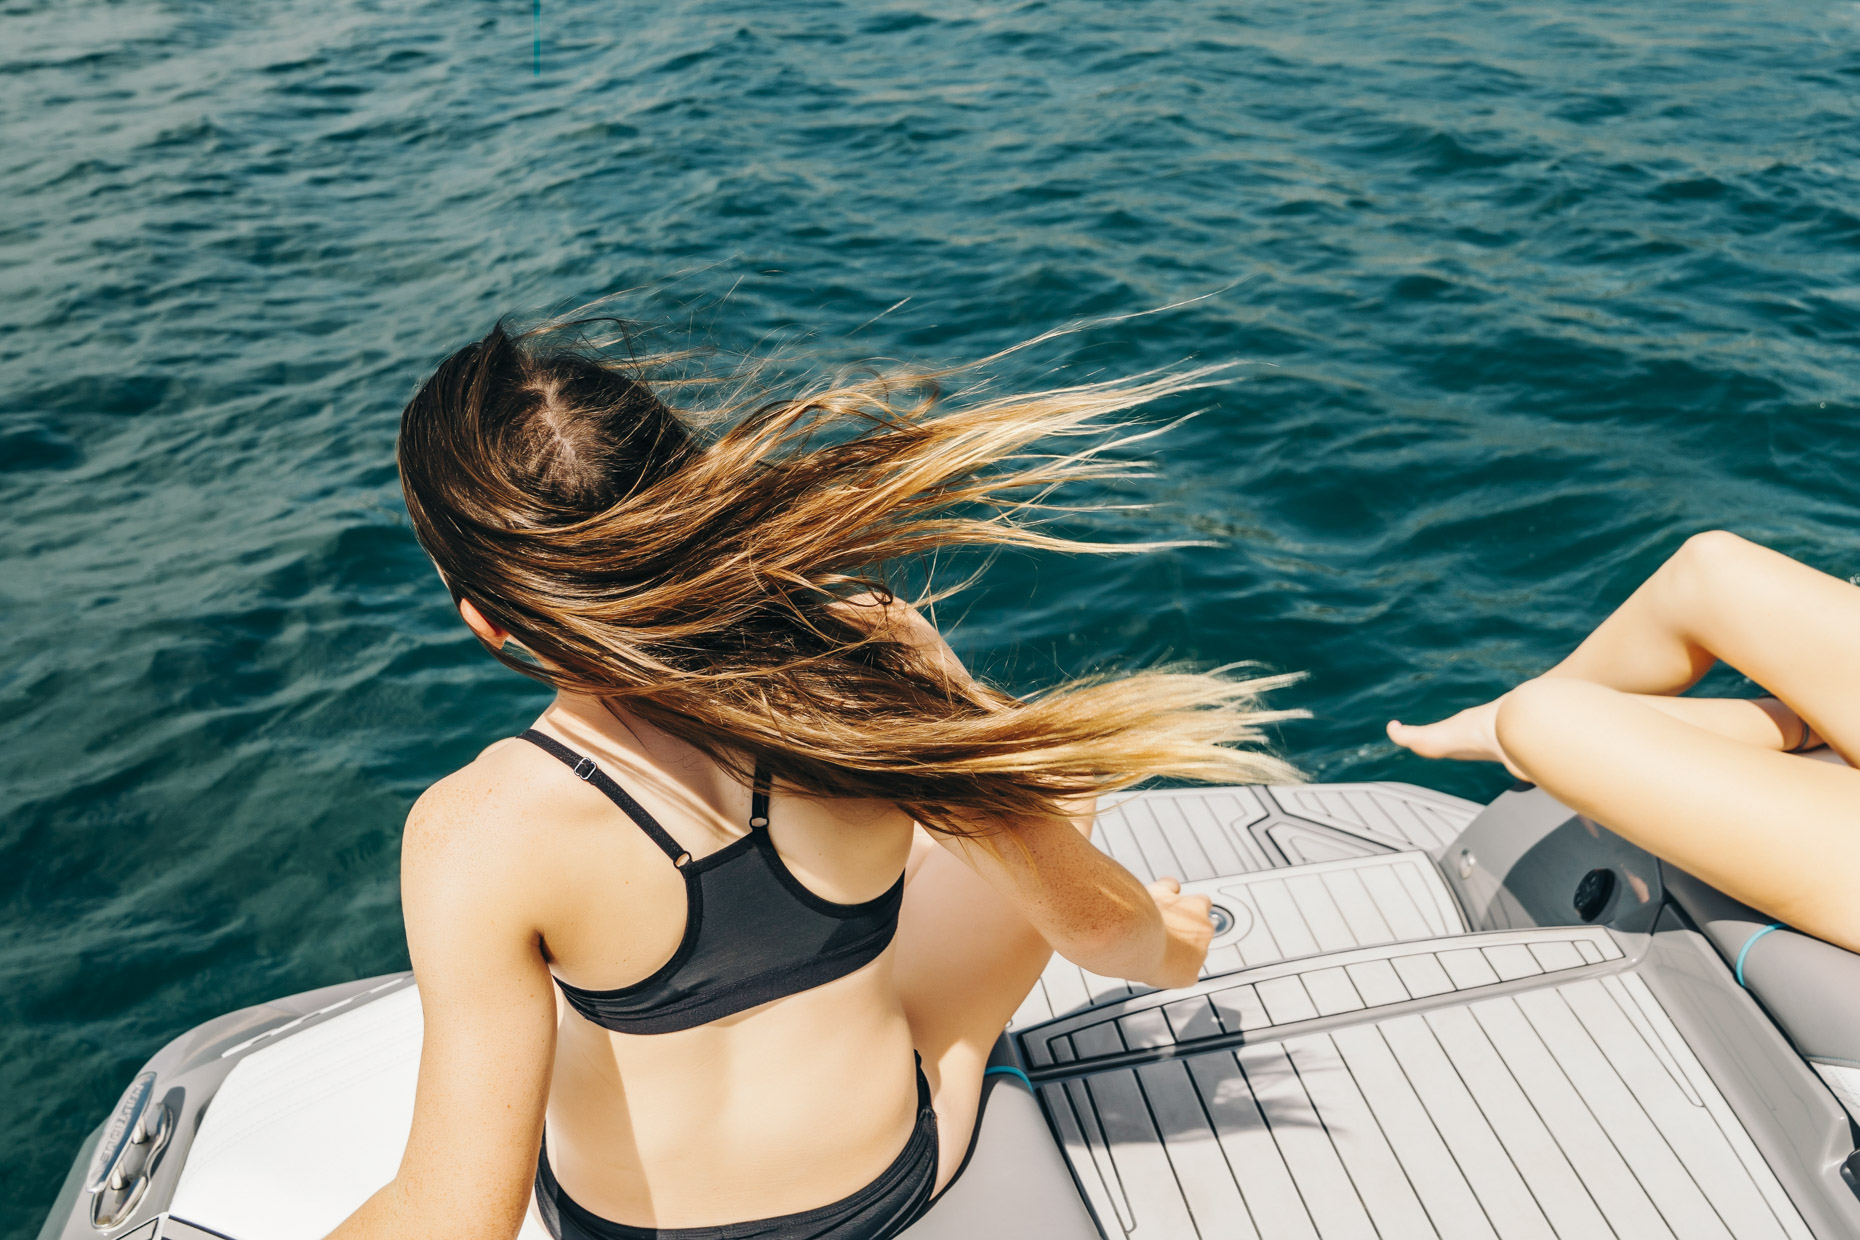 Teen sitting on edge of boat on lake with her hair blowing in the wind